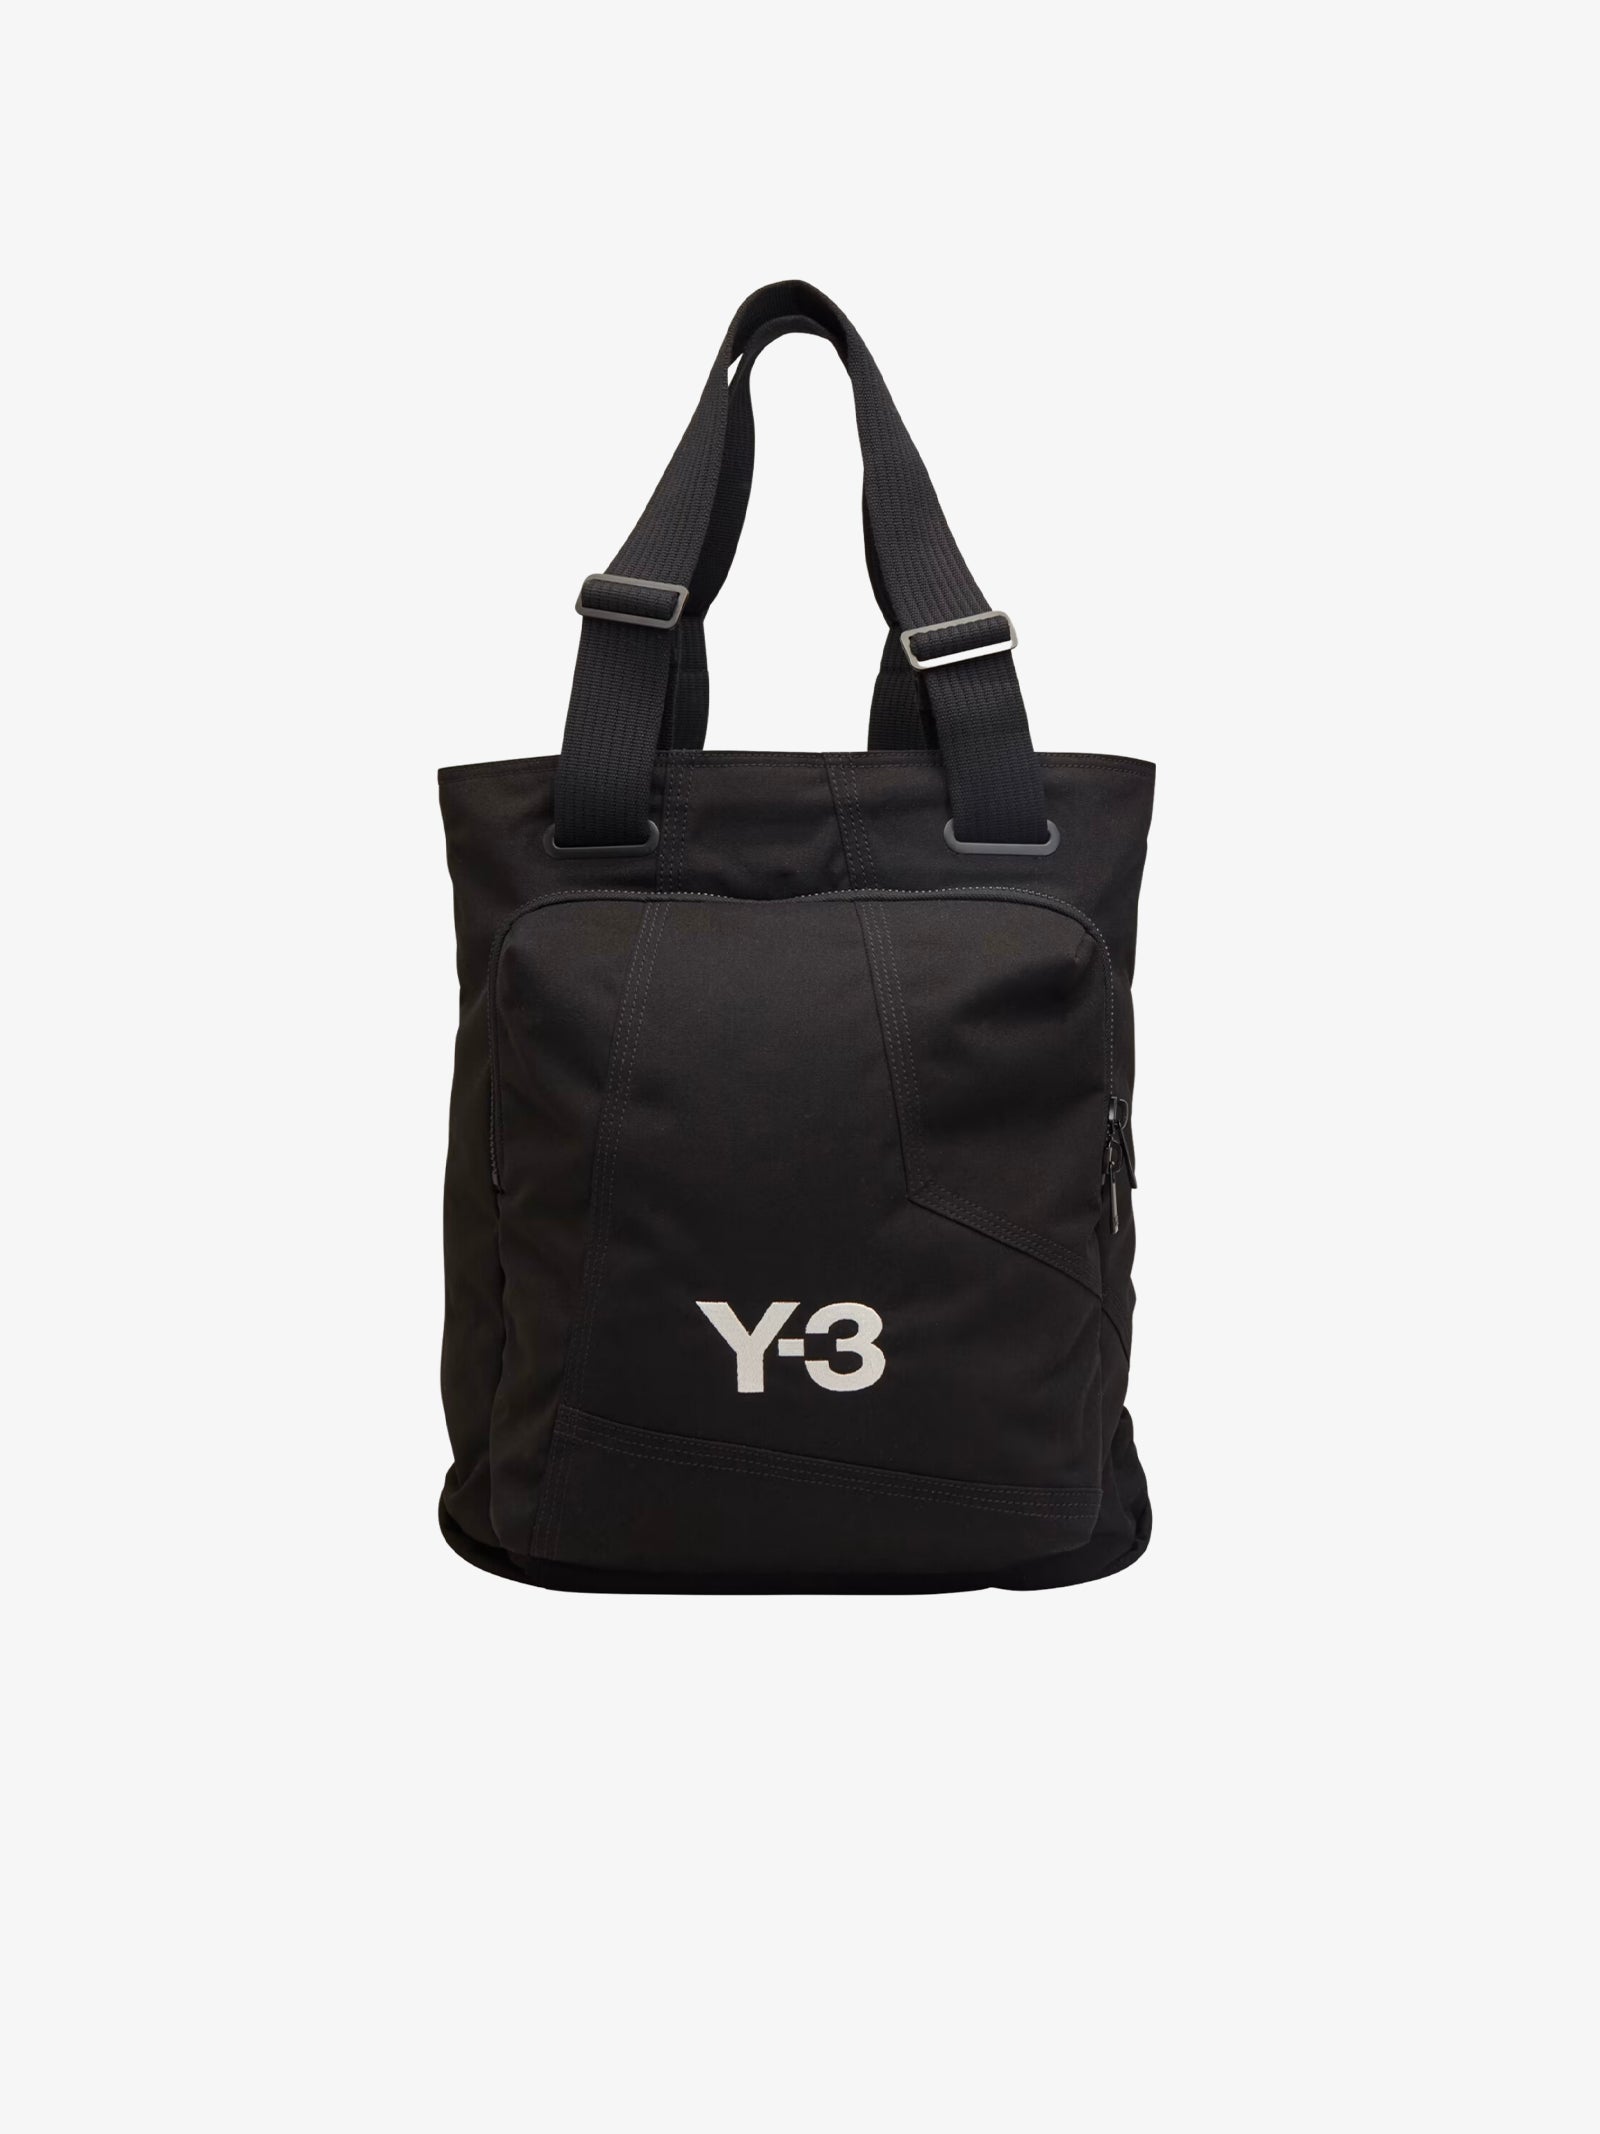 CHECKMATE ROYALE TOTE